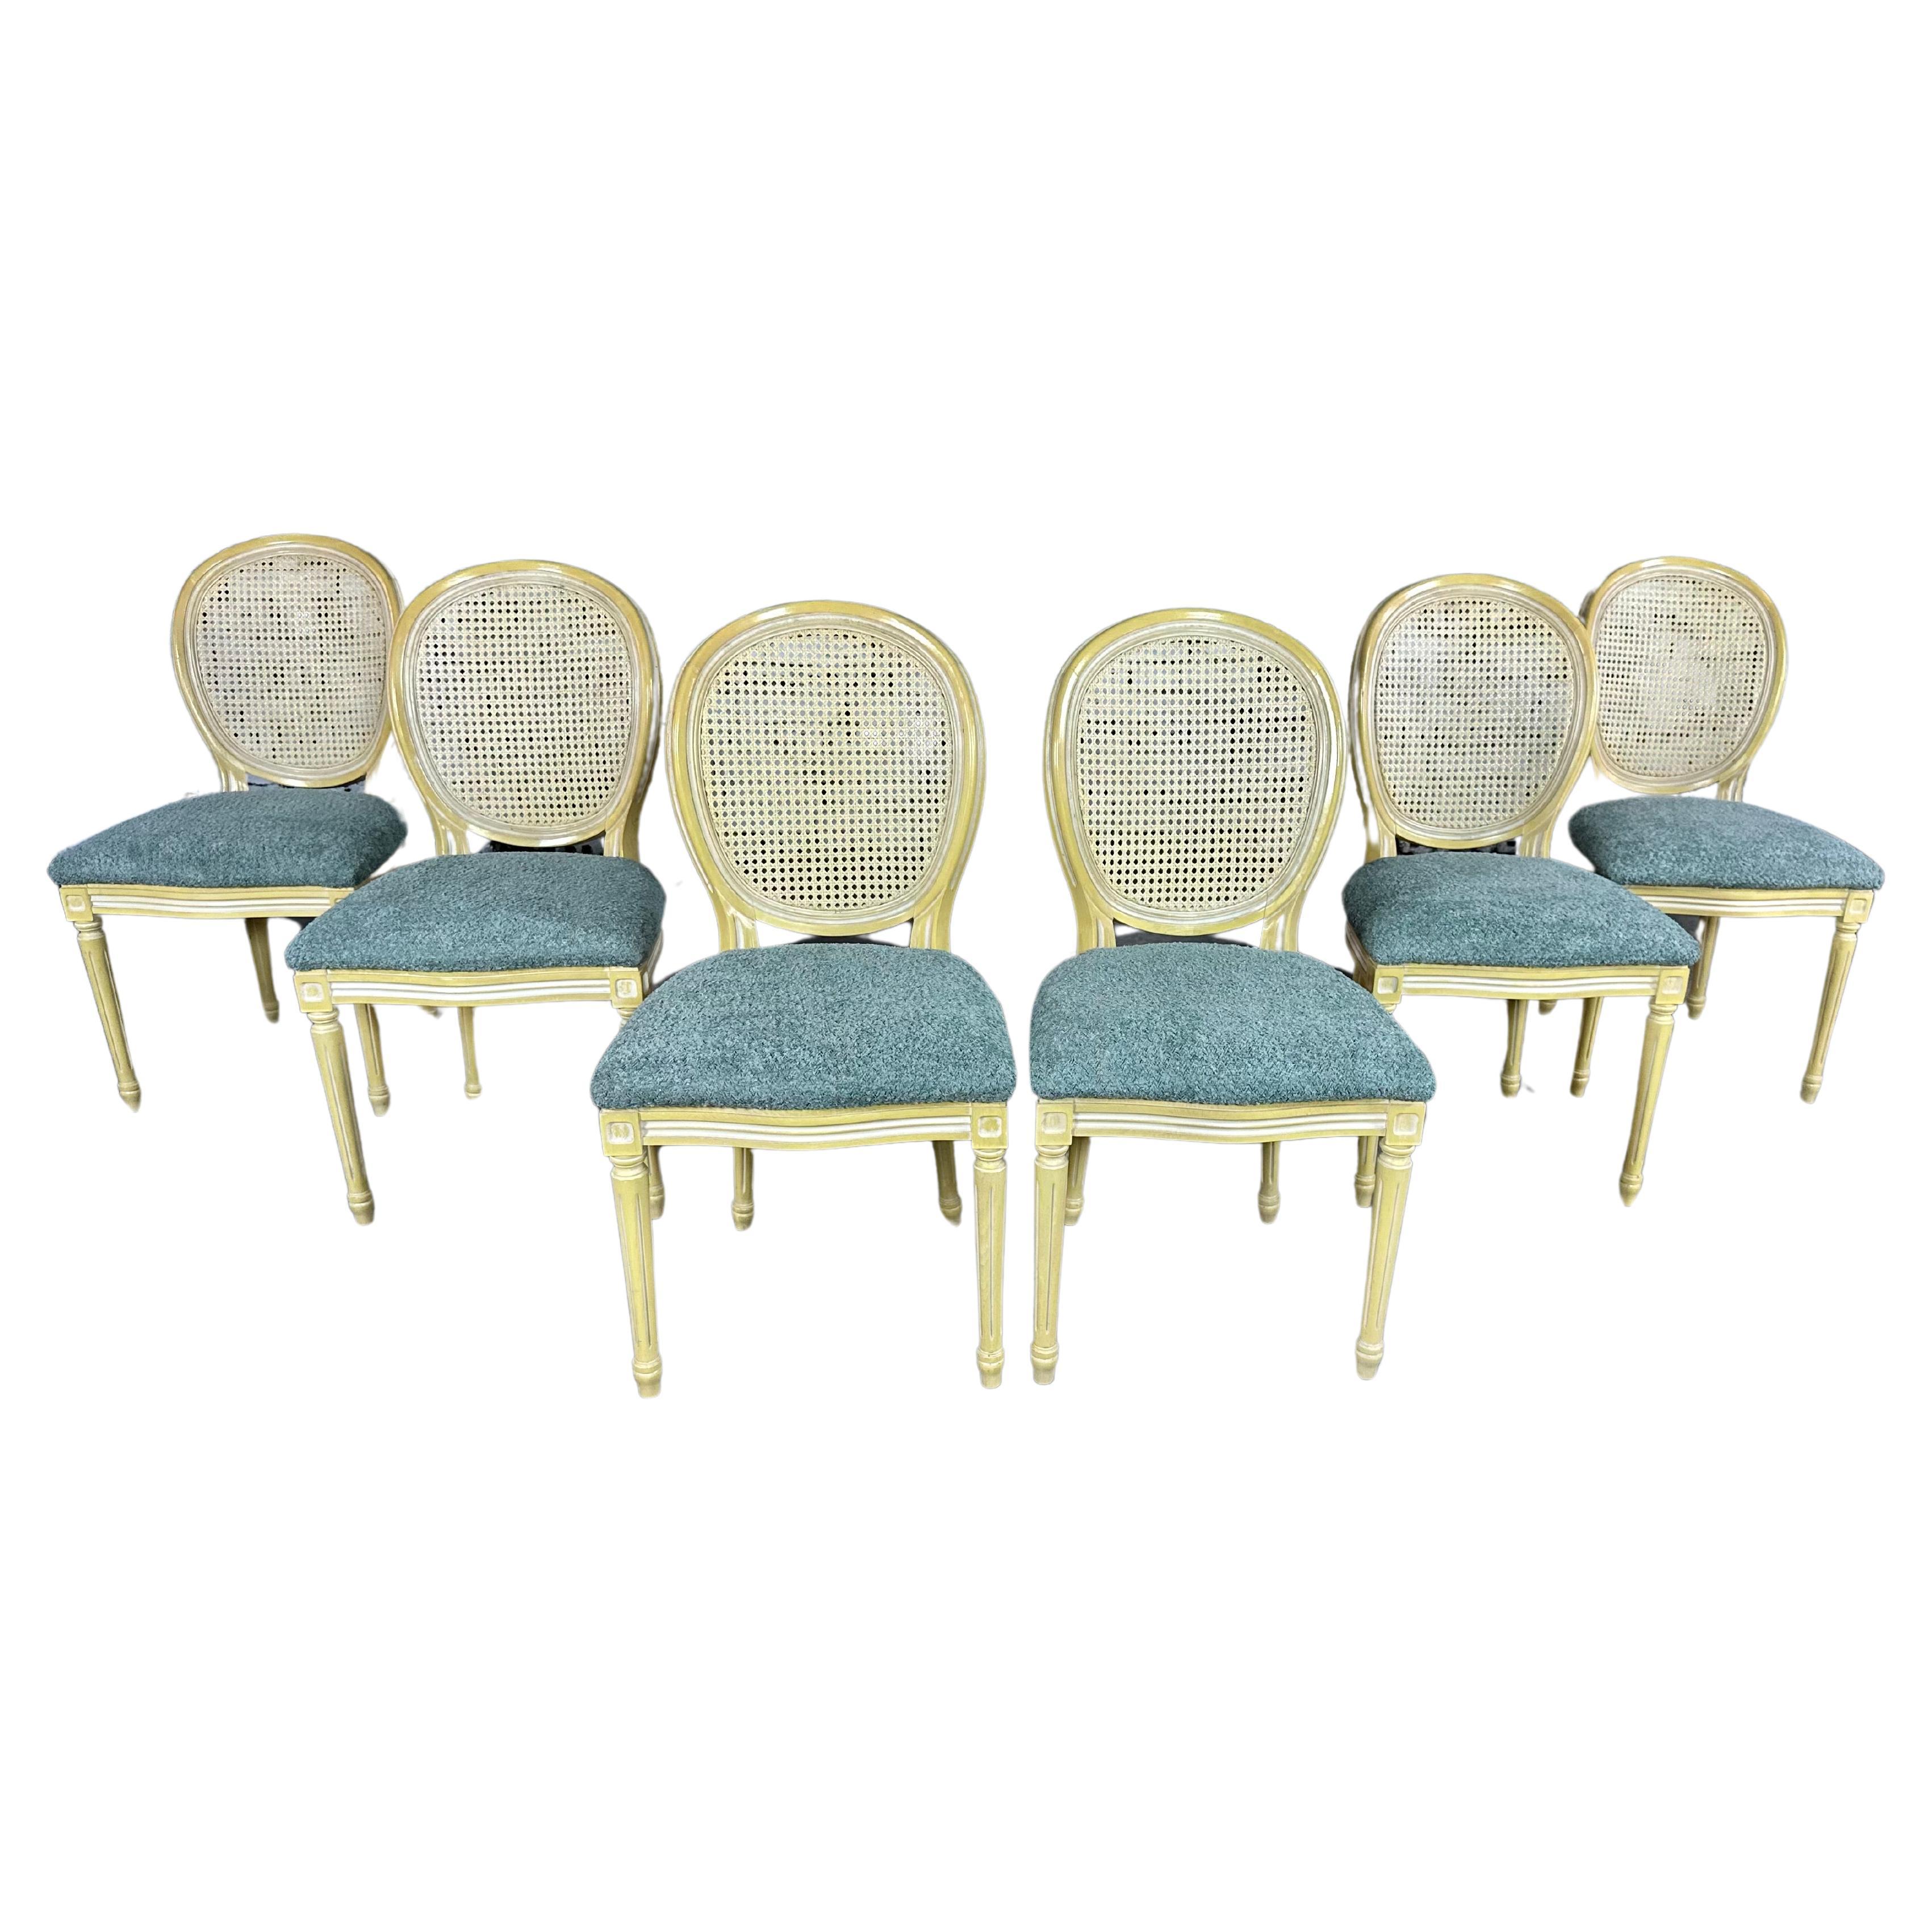 Renewed Louis XVI Style Medallion Cane Back Dining Chairs - Set of 6 For Sale